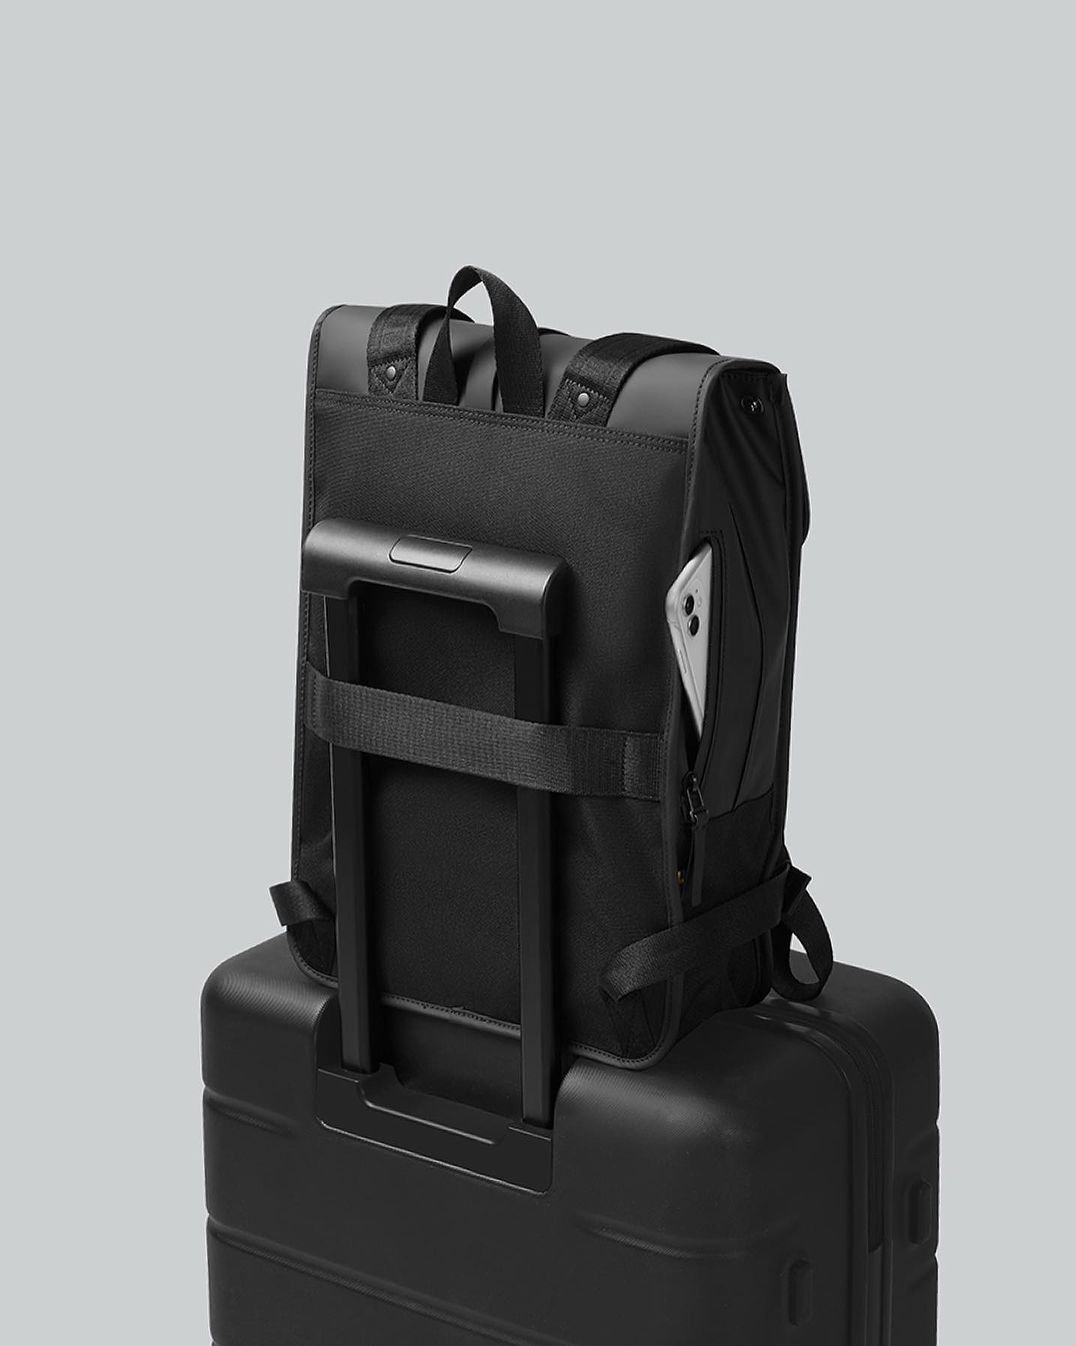 Däsh backpack is a compact yet functional backpack for your daily commute or weekend trips.Both 13” and 16” backpacks have the luggage strap, makes it easy for travelling.#gastonluga